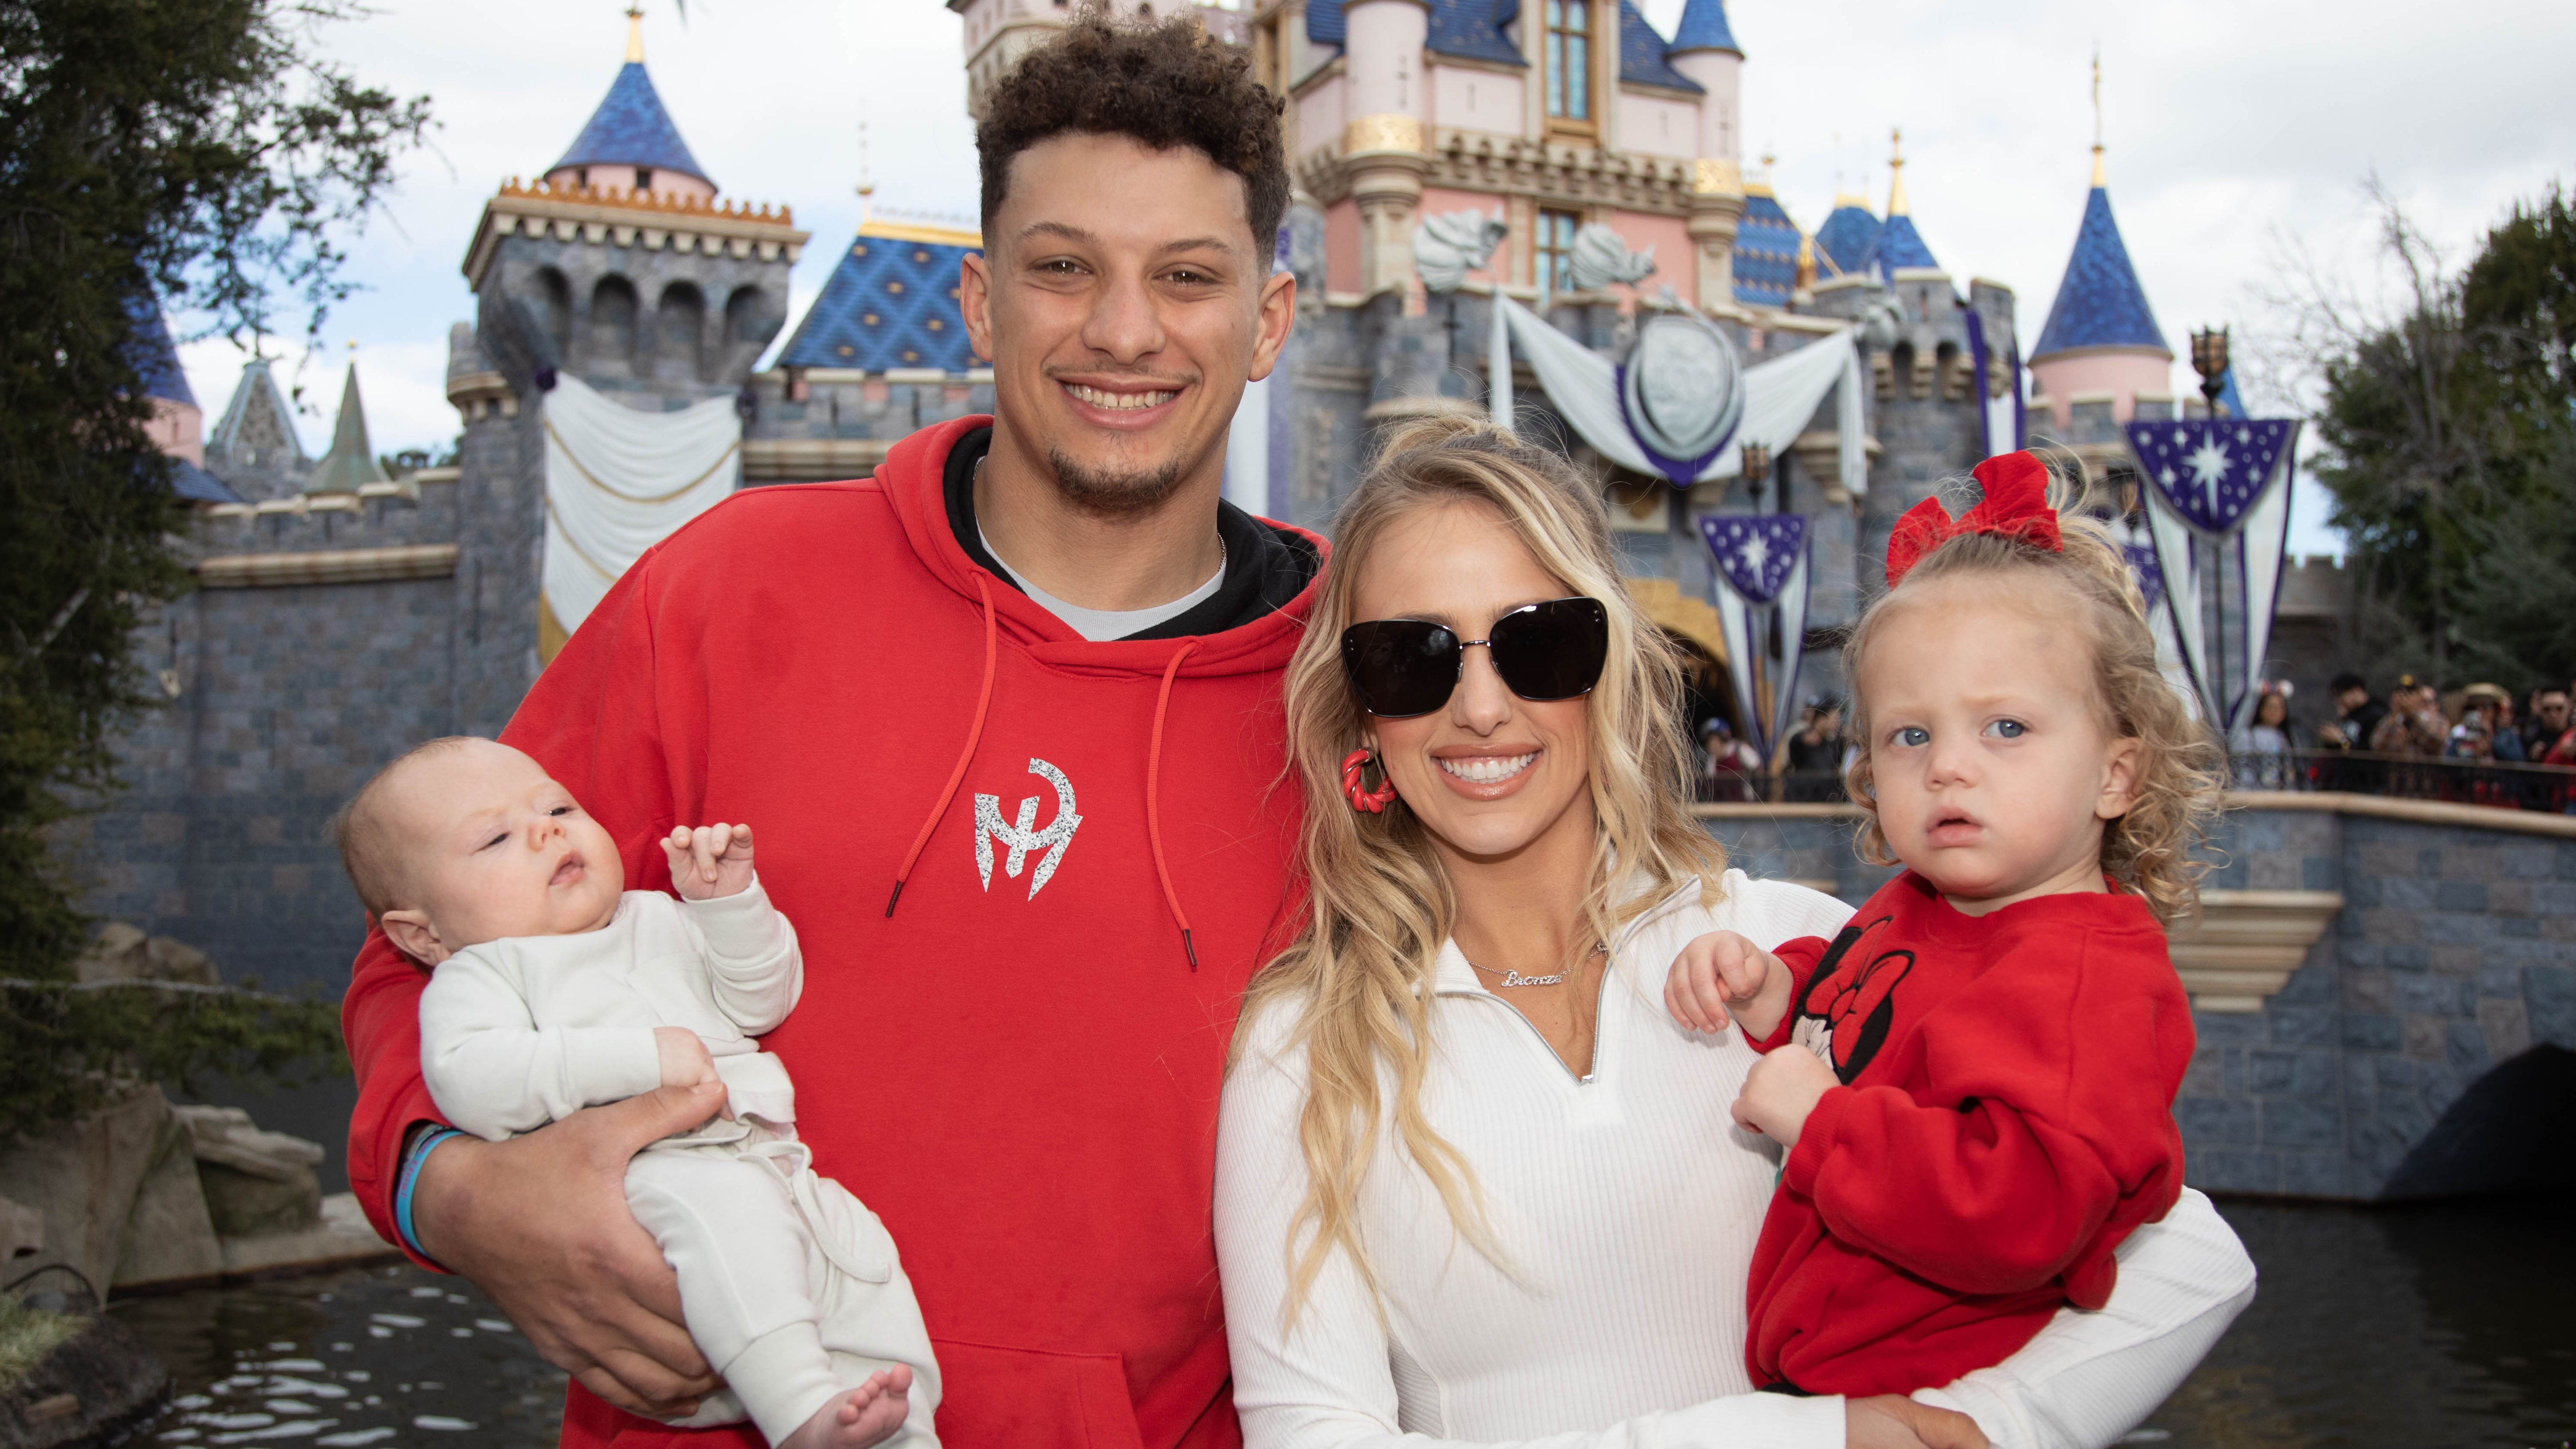 Pregnant Brittany Mahomes Smiles at Game with Daughter Sterling: Photos